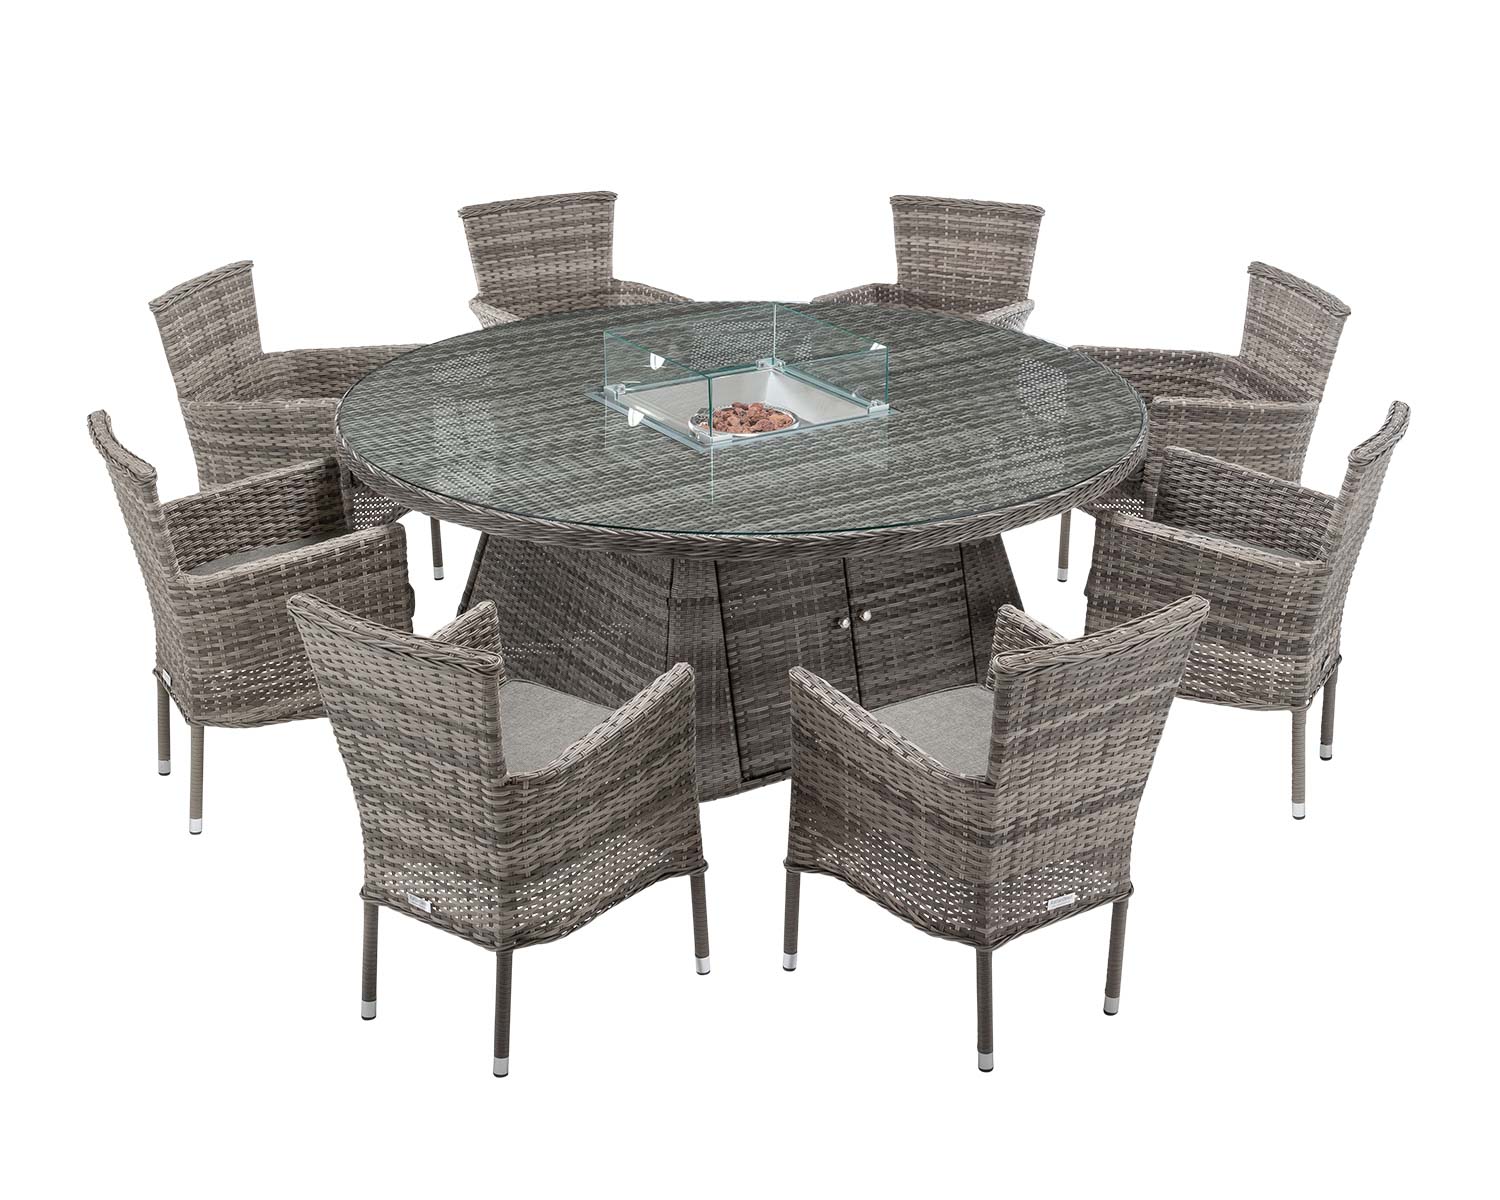 8 Seater Rattan Garden Dining Set With Large Round Table In Grey With Fire Pit Cambridge Rattan Direct